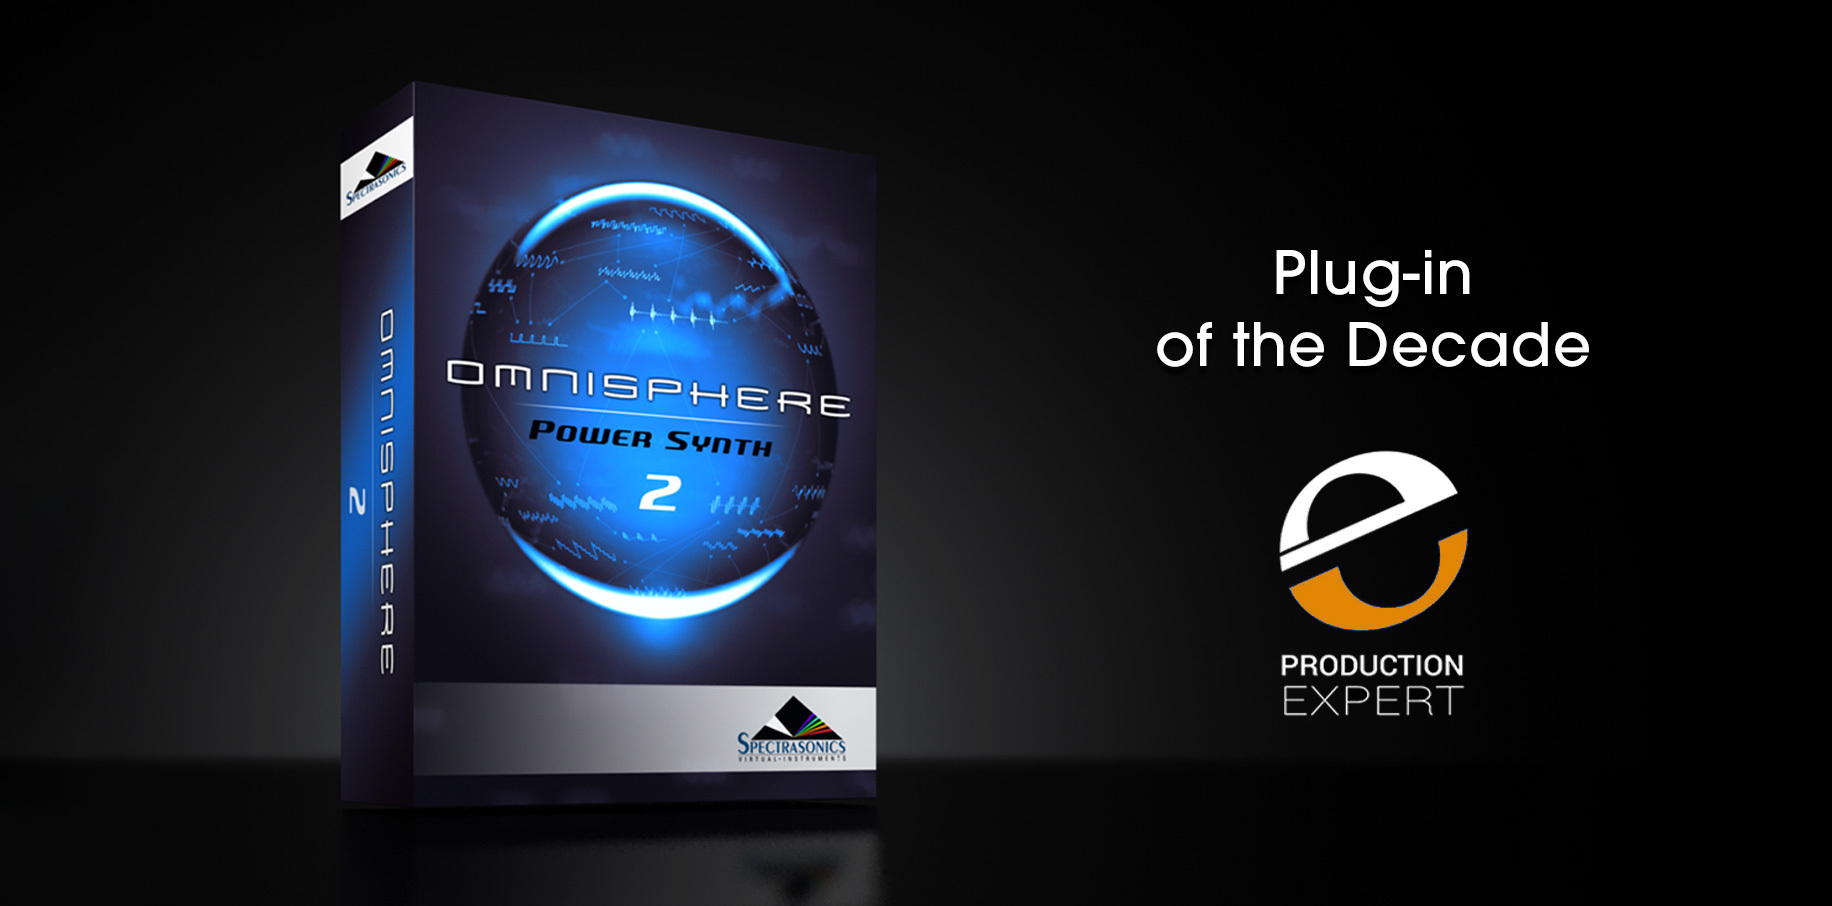 Why is Spectrasonics Omnisphere 2 Plug-in of the Decade?